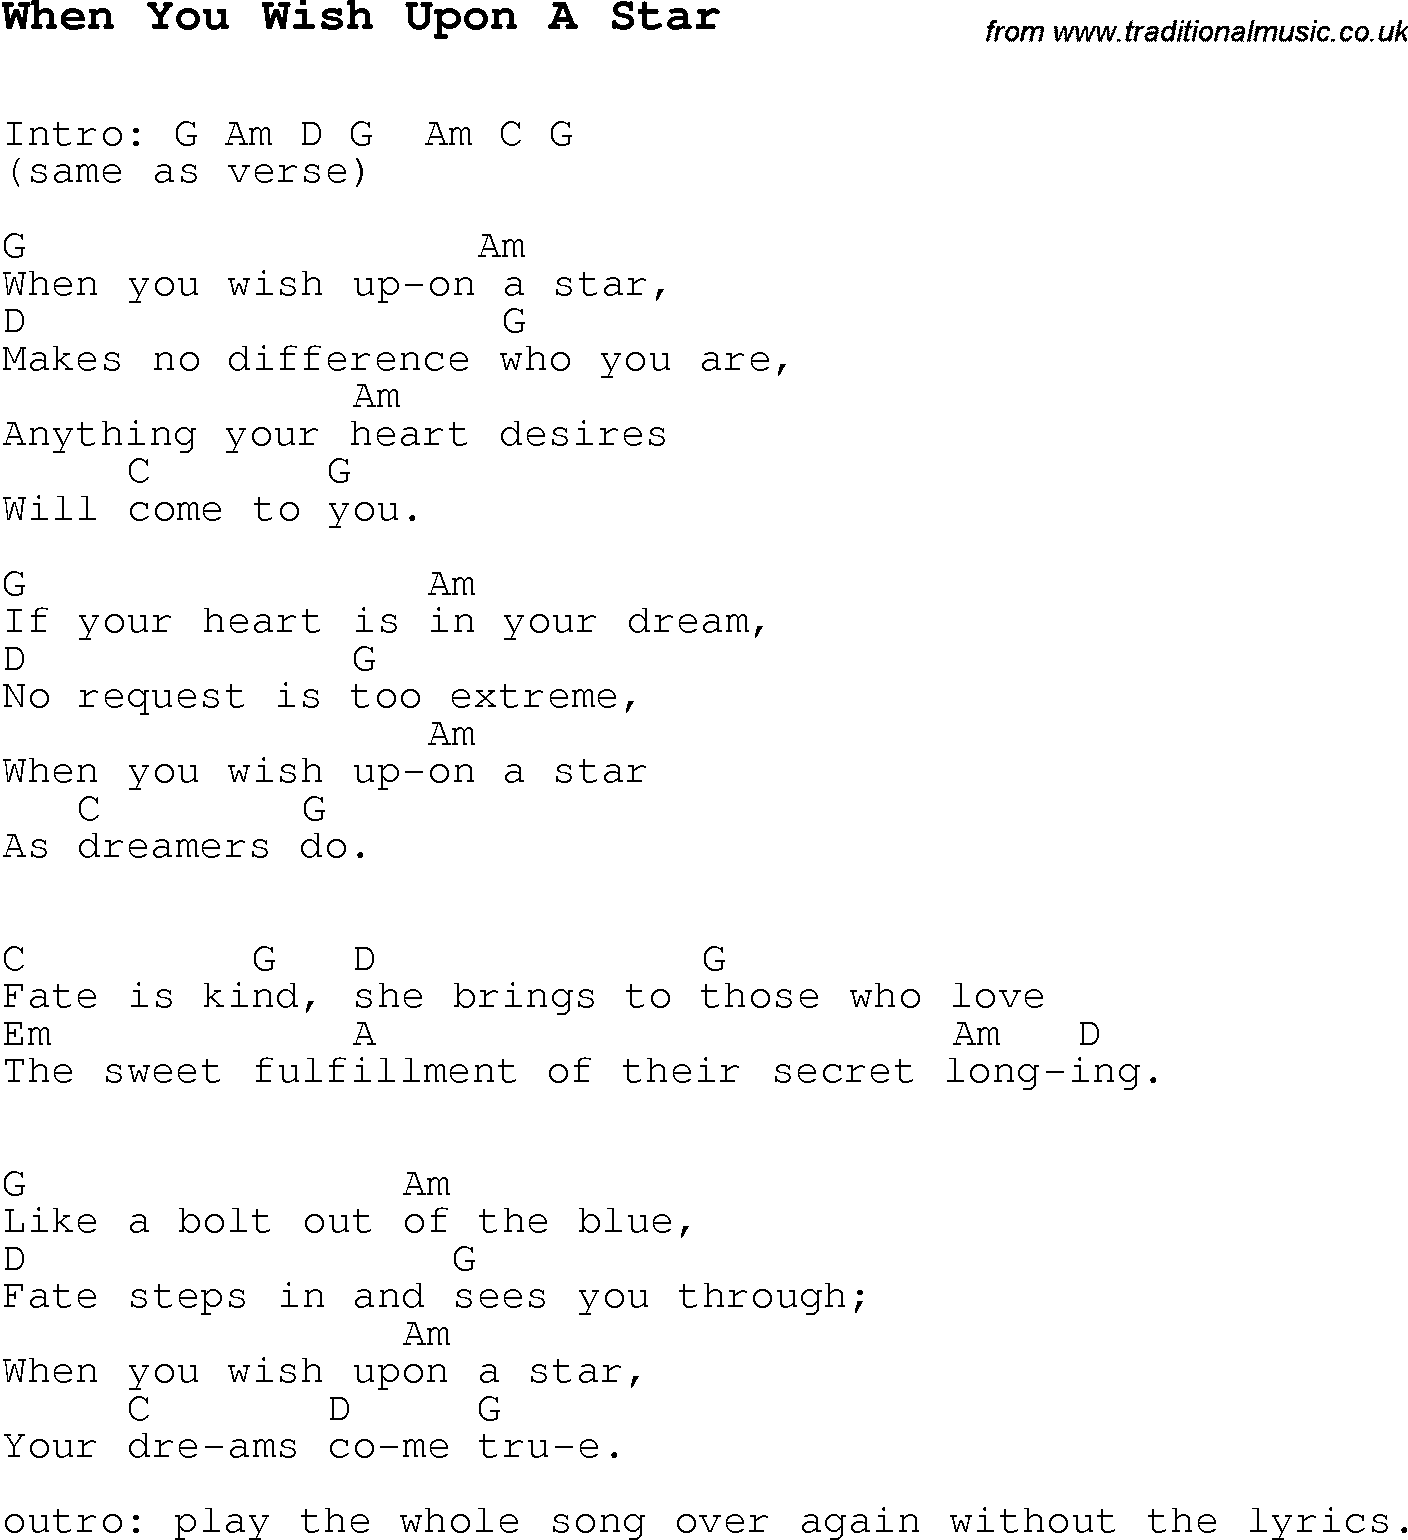 Christmas Carol/Song lyrics with chords for When You Wish Upon A Star